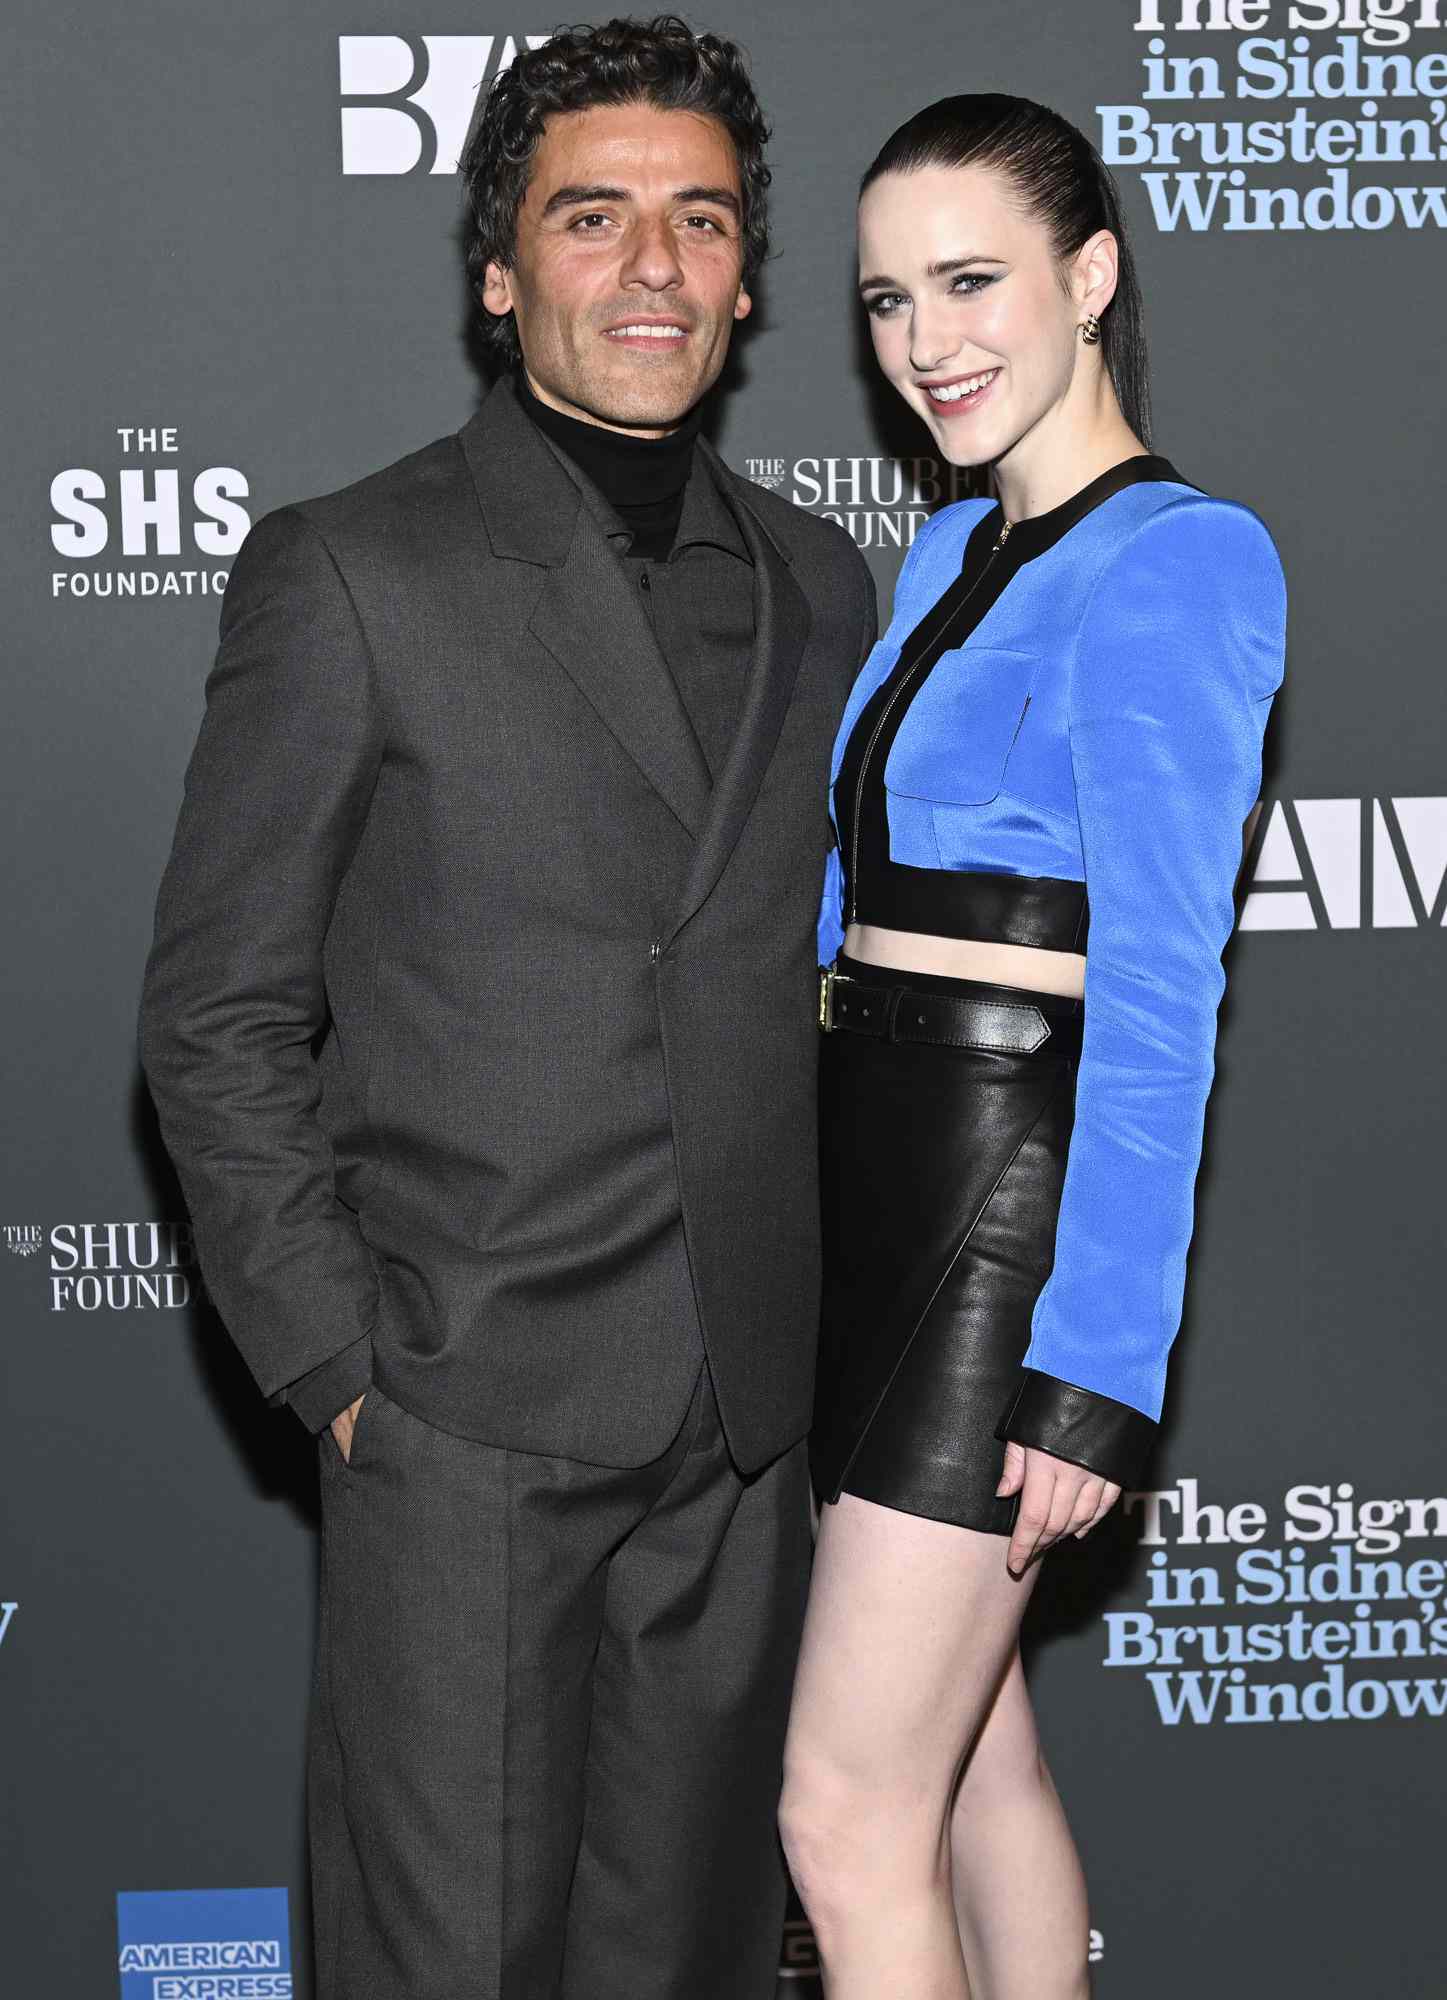 Oscar Isaac and Rachel Brosnahan attend as BAM (Brooklyn Academy of Music) presents the opening night for The Sign In Sidney Brustein's Window at Brooklyn Academy of Music on February 23, 2023 in New York City